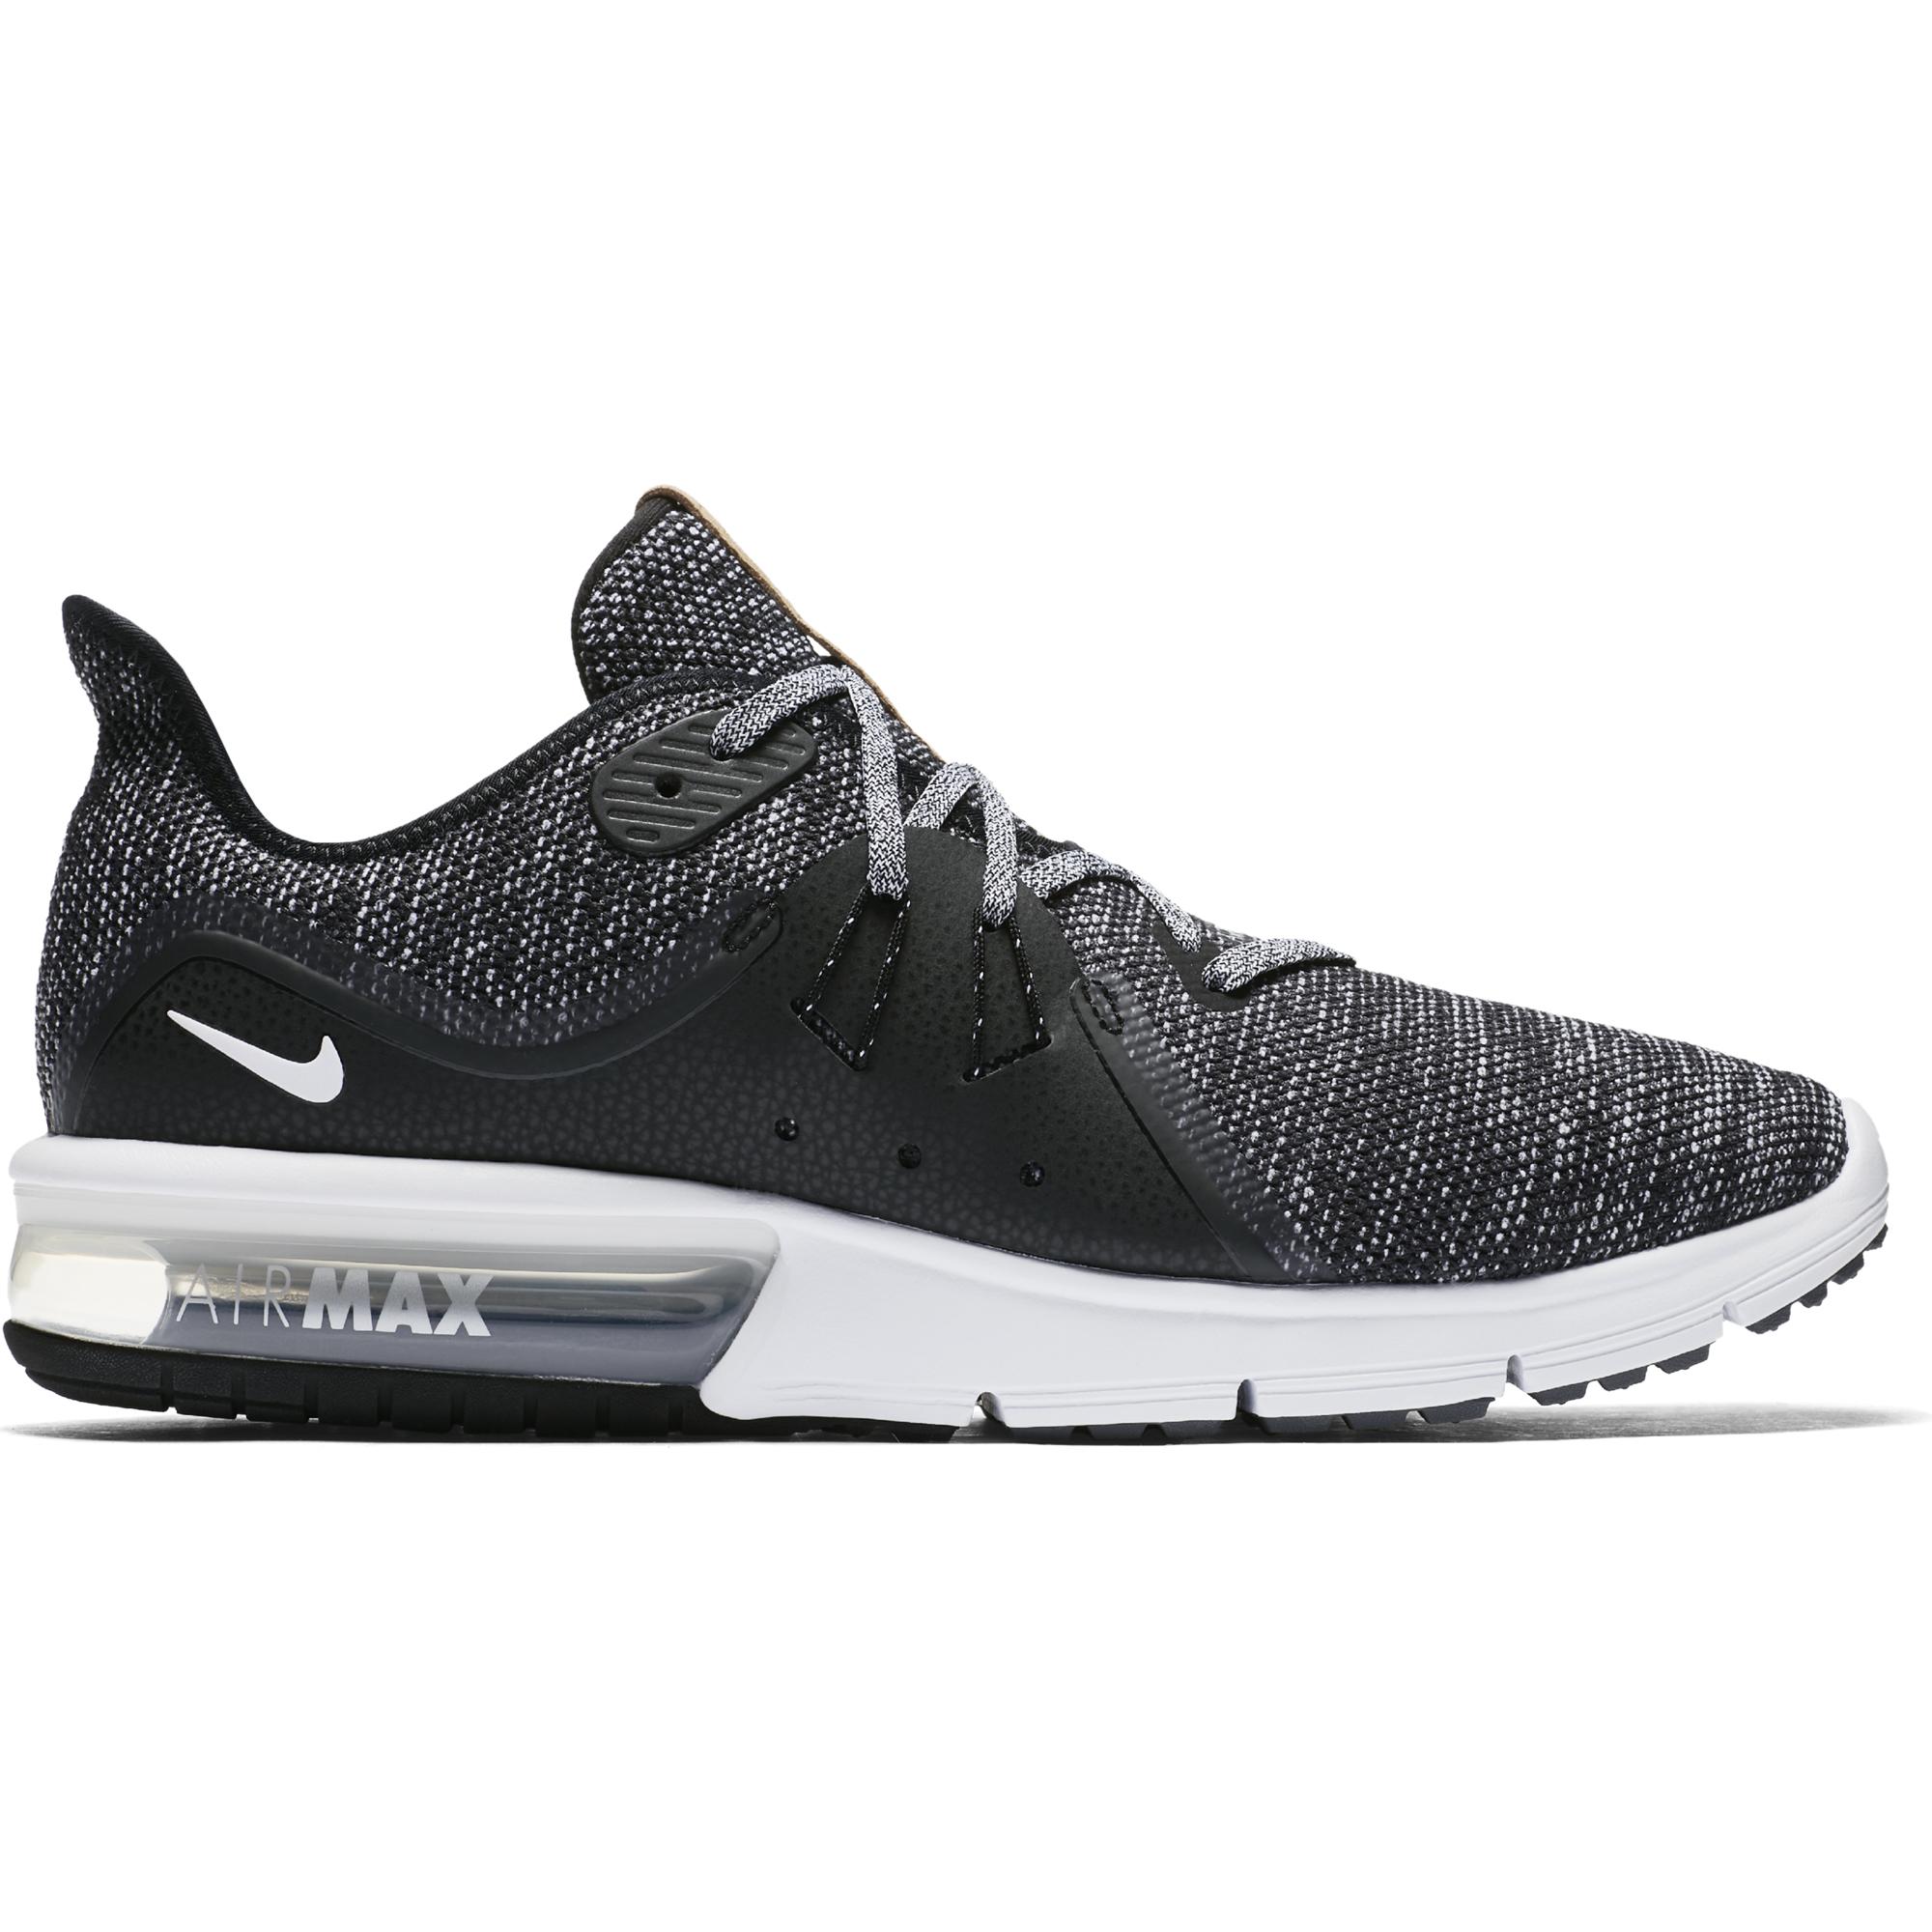 Nike Shoes Air Max Sequent 3 Black 